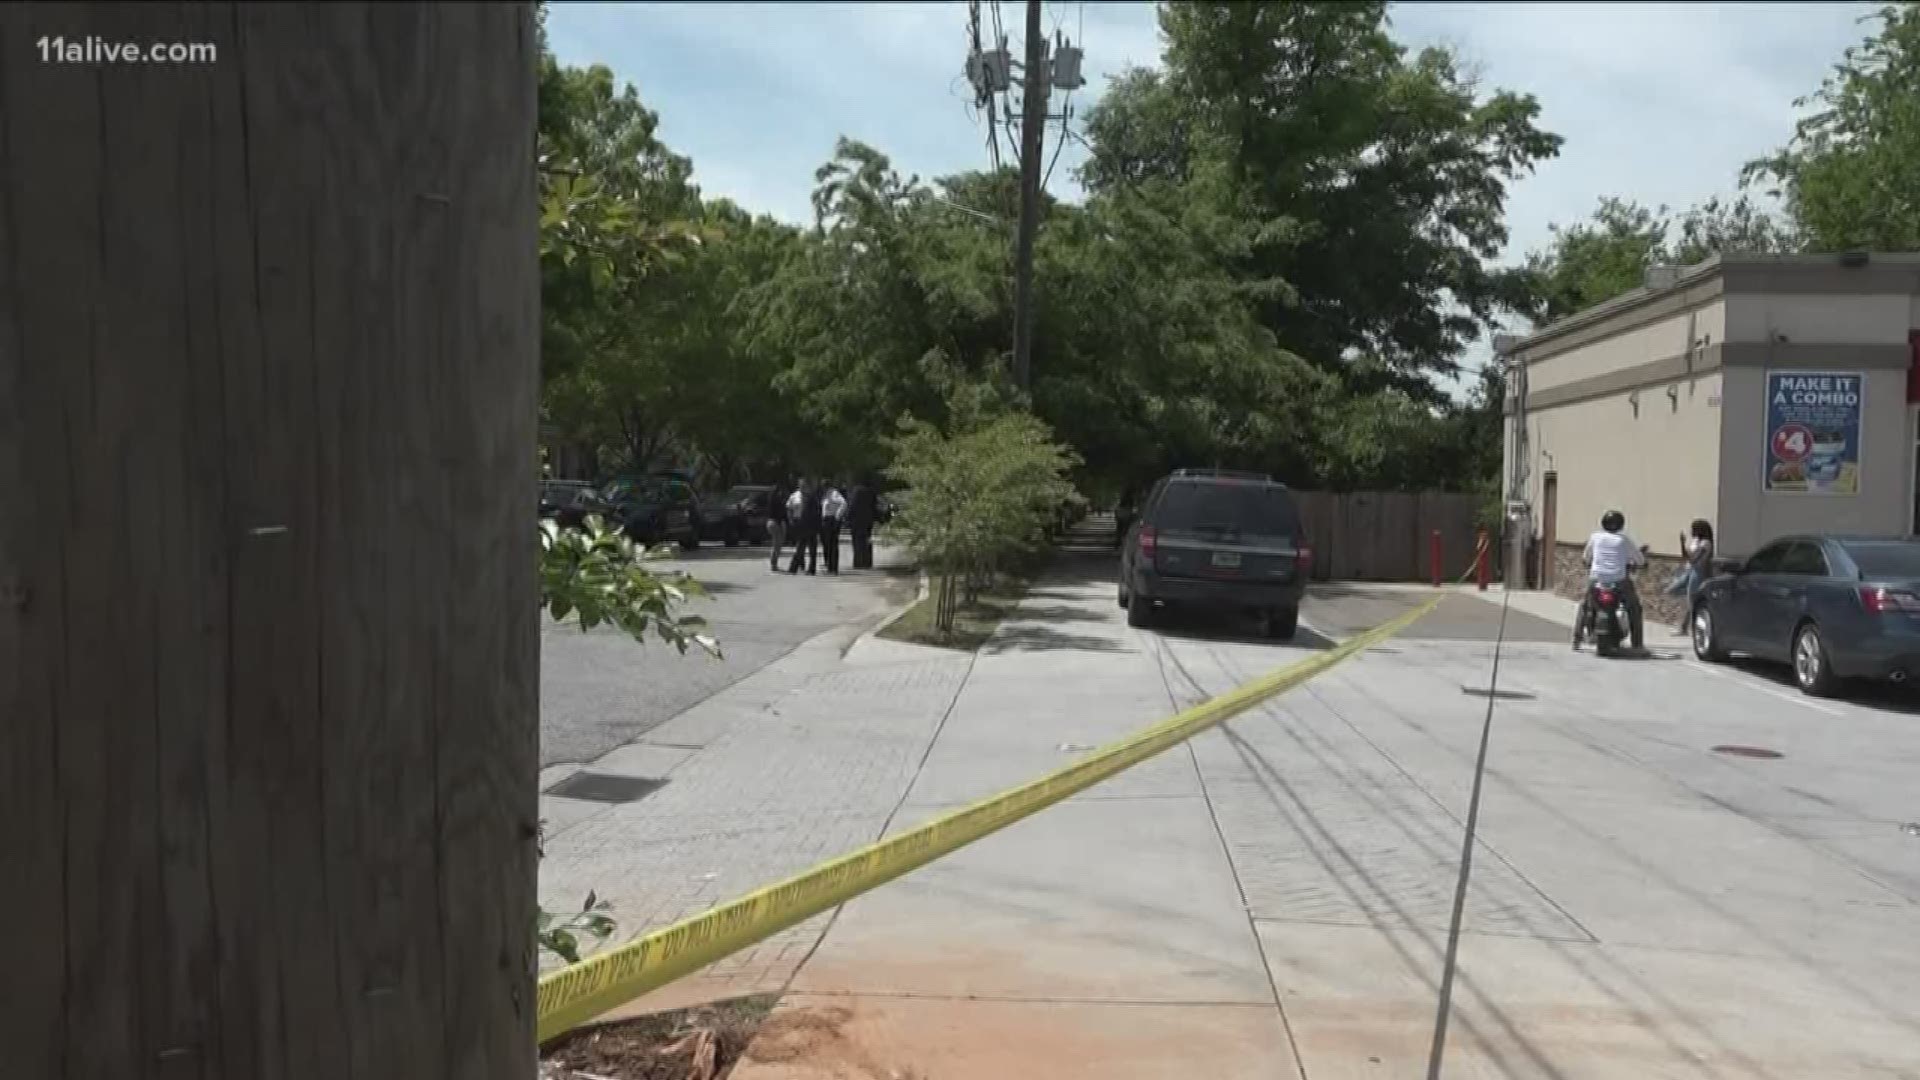 According to Atlanta Police Investigator James White, homicide detectives were called to the 900 block of Sells Avenue after 1 p.m.